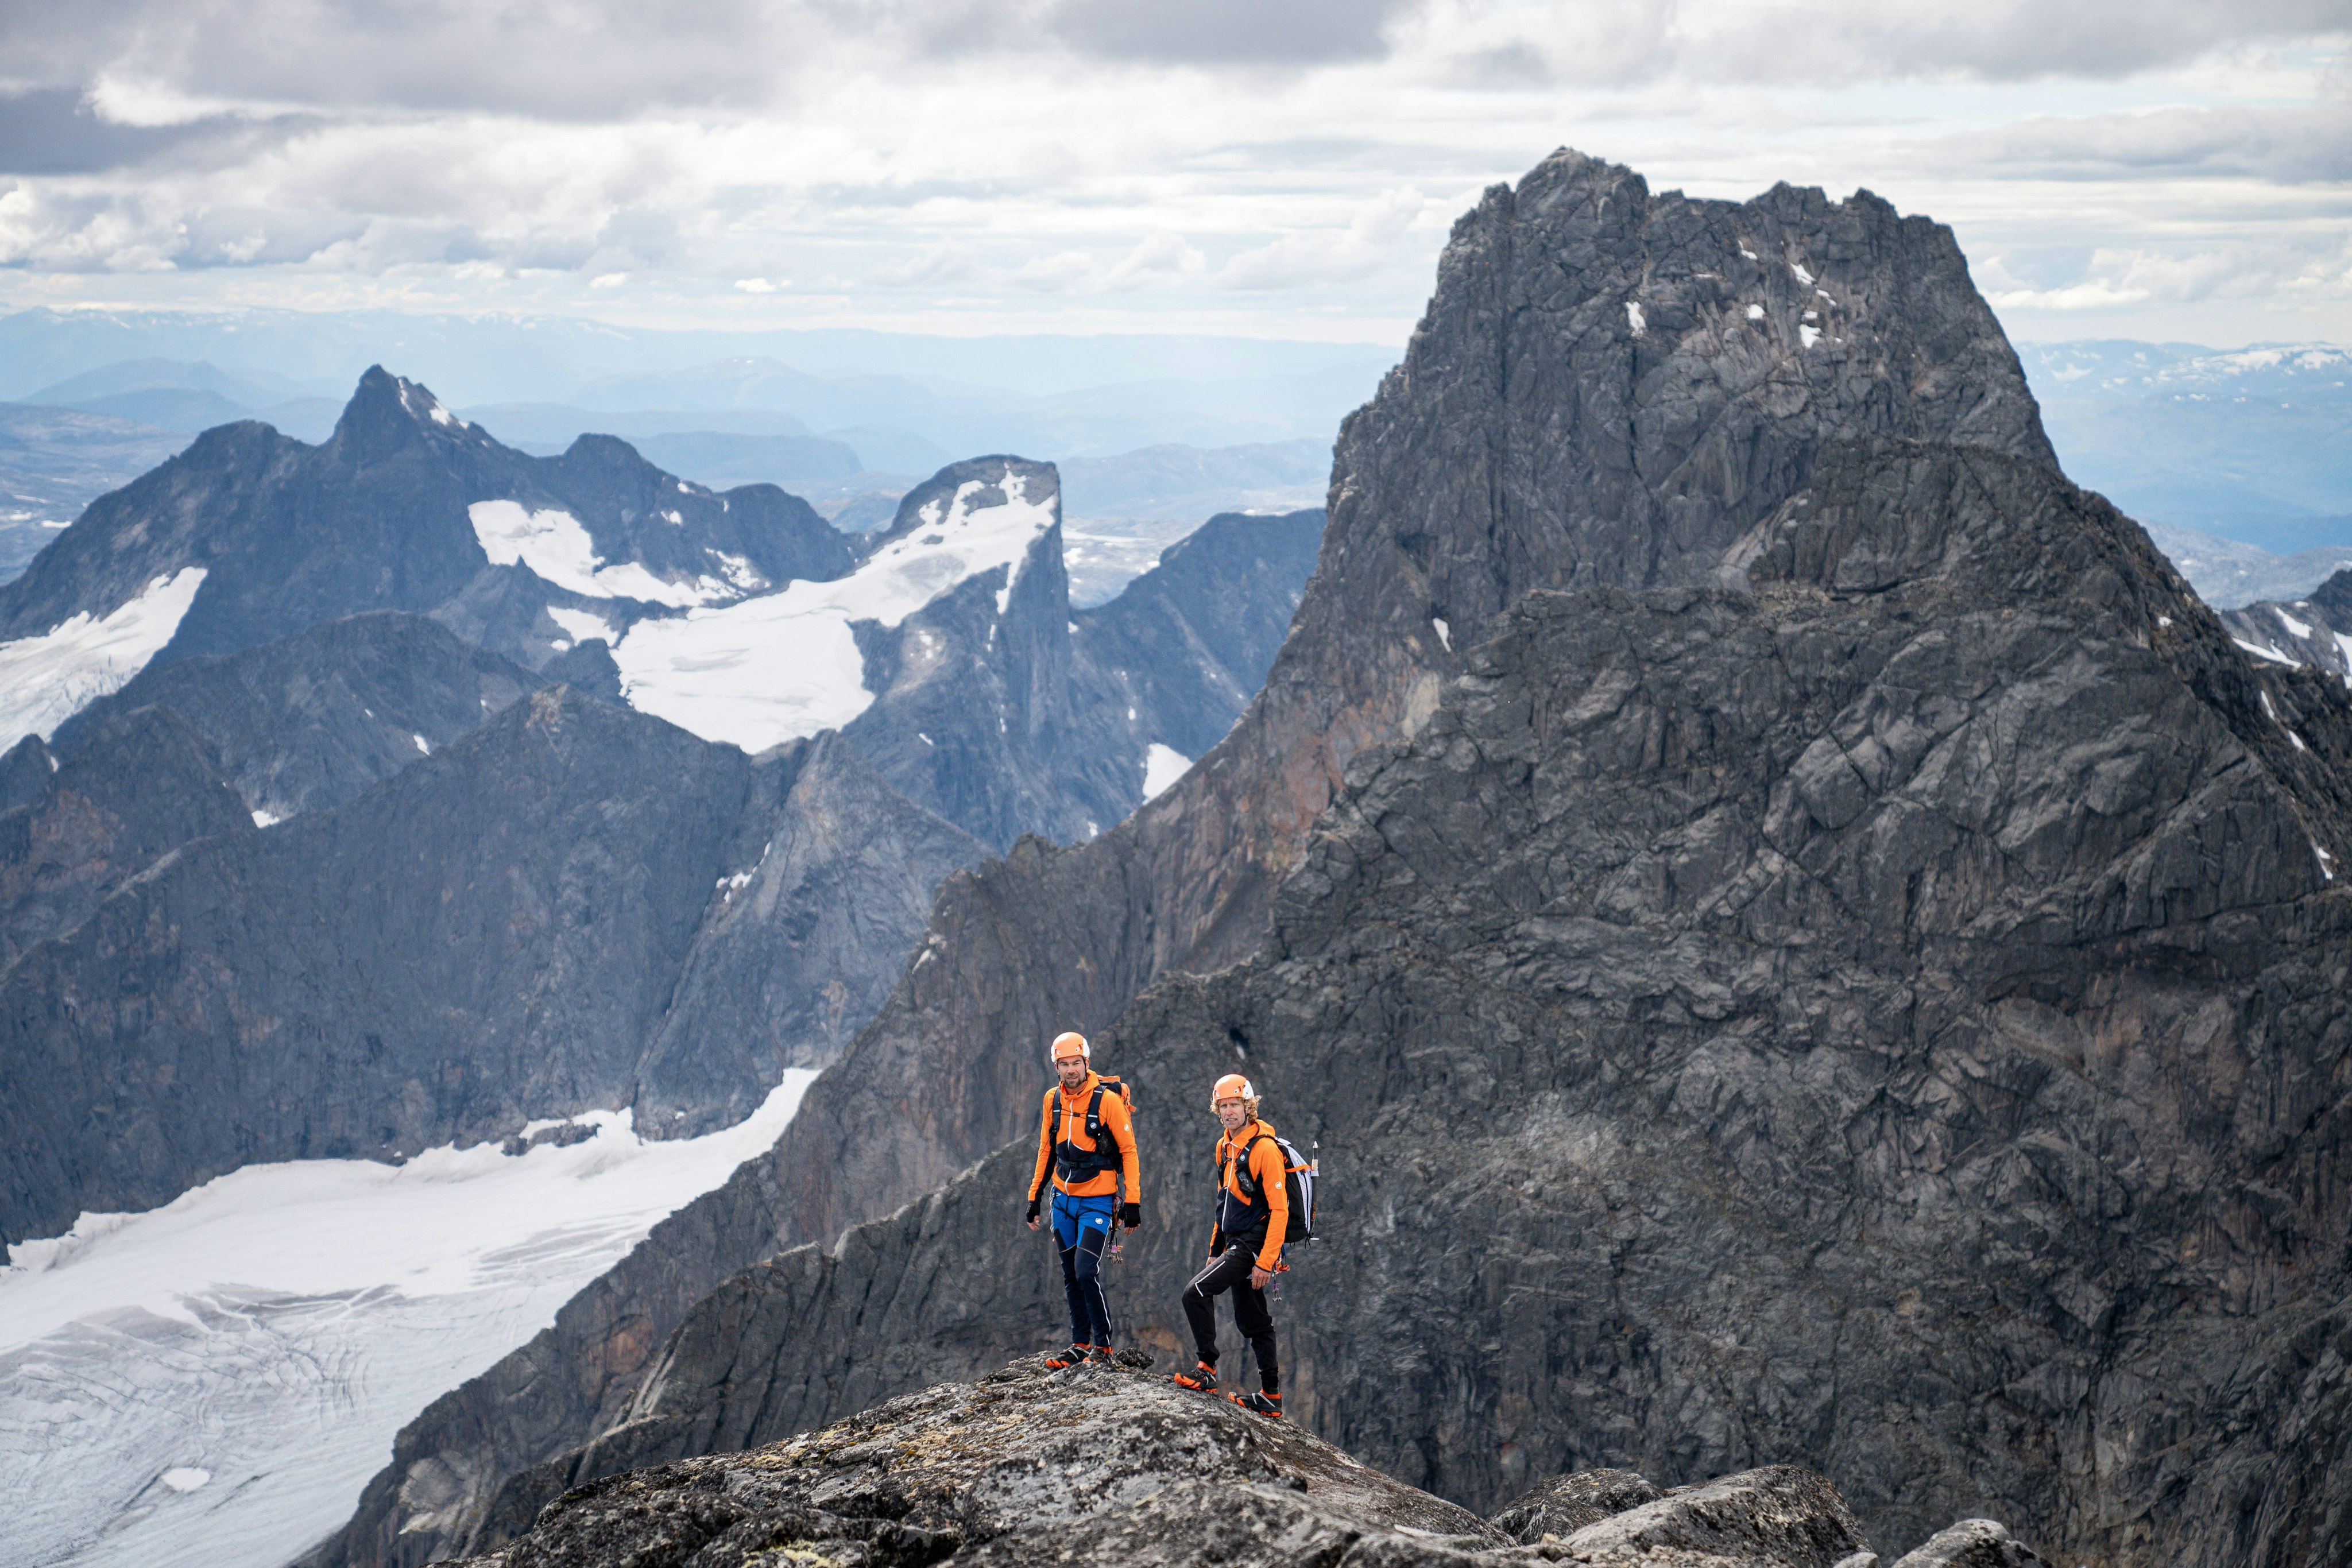 Two hikers wearing Mammut orange jackets standing on a rugged mountain peak with a vast alpine range and snow-capped peaks in the background.